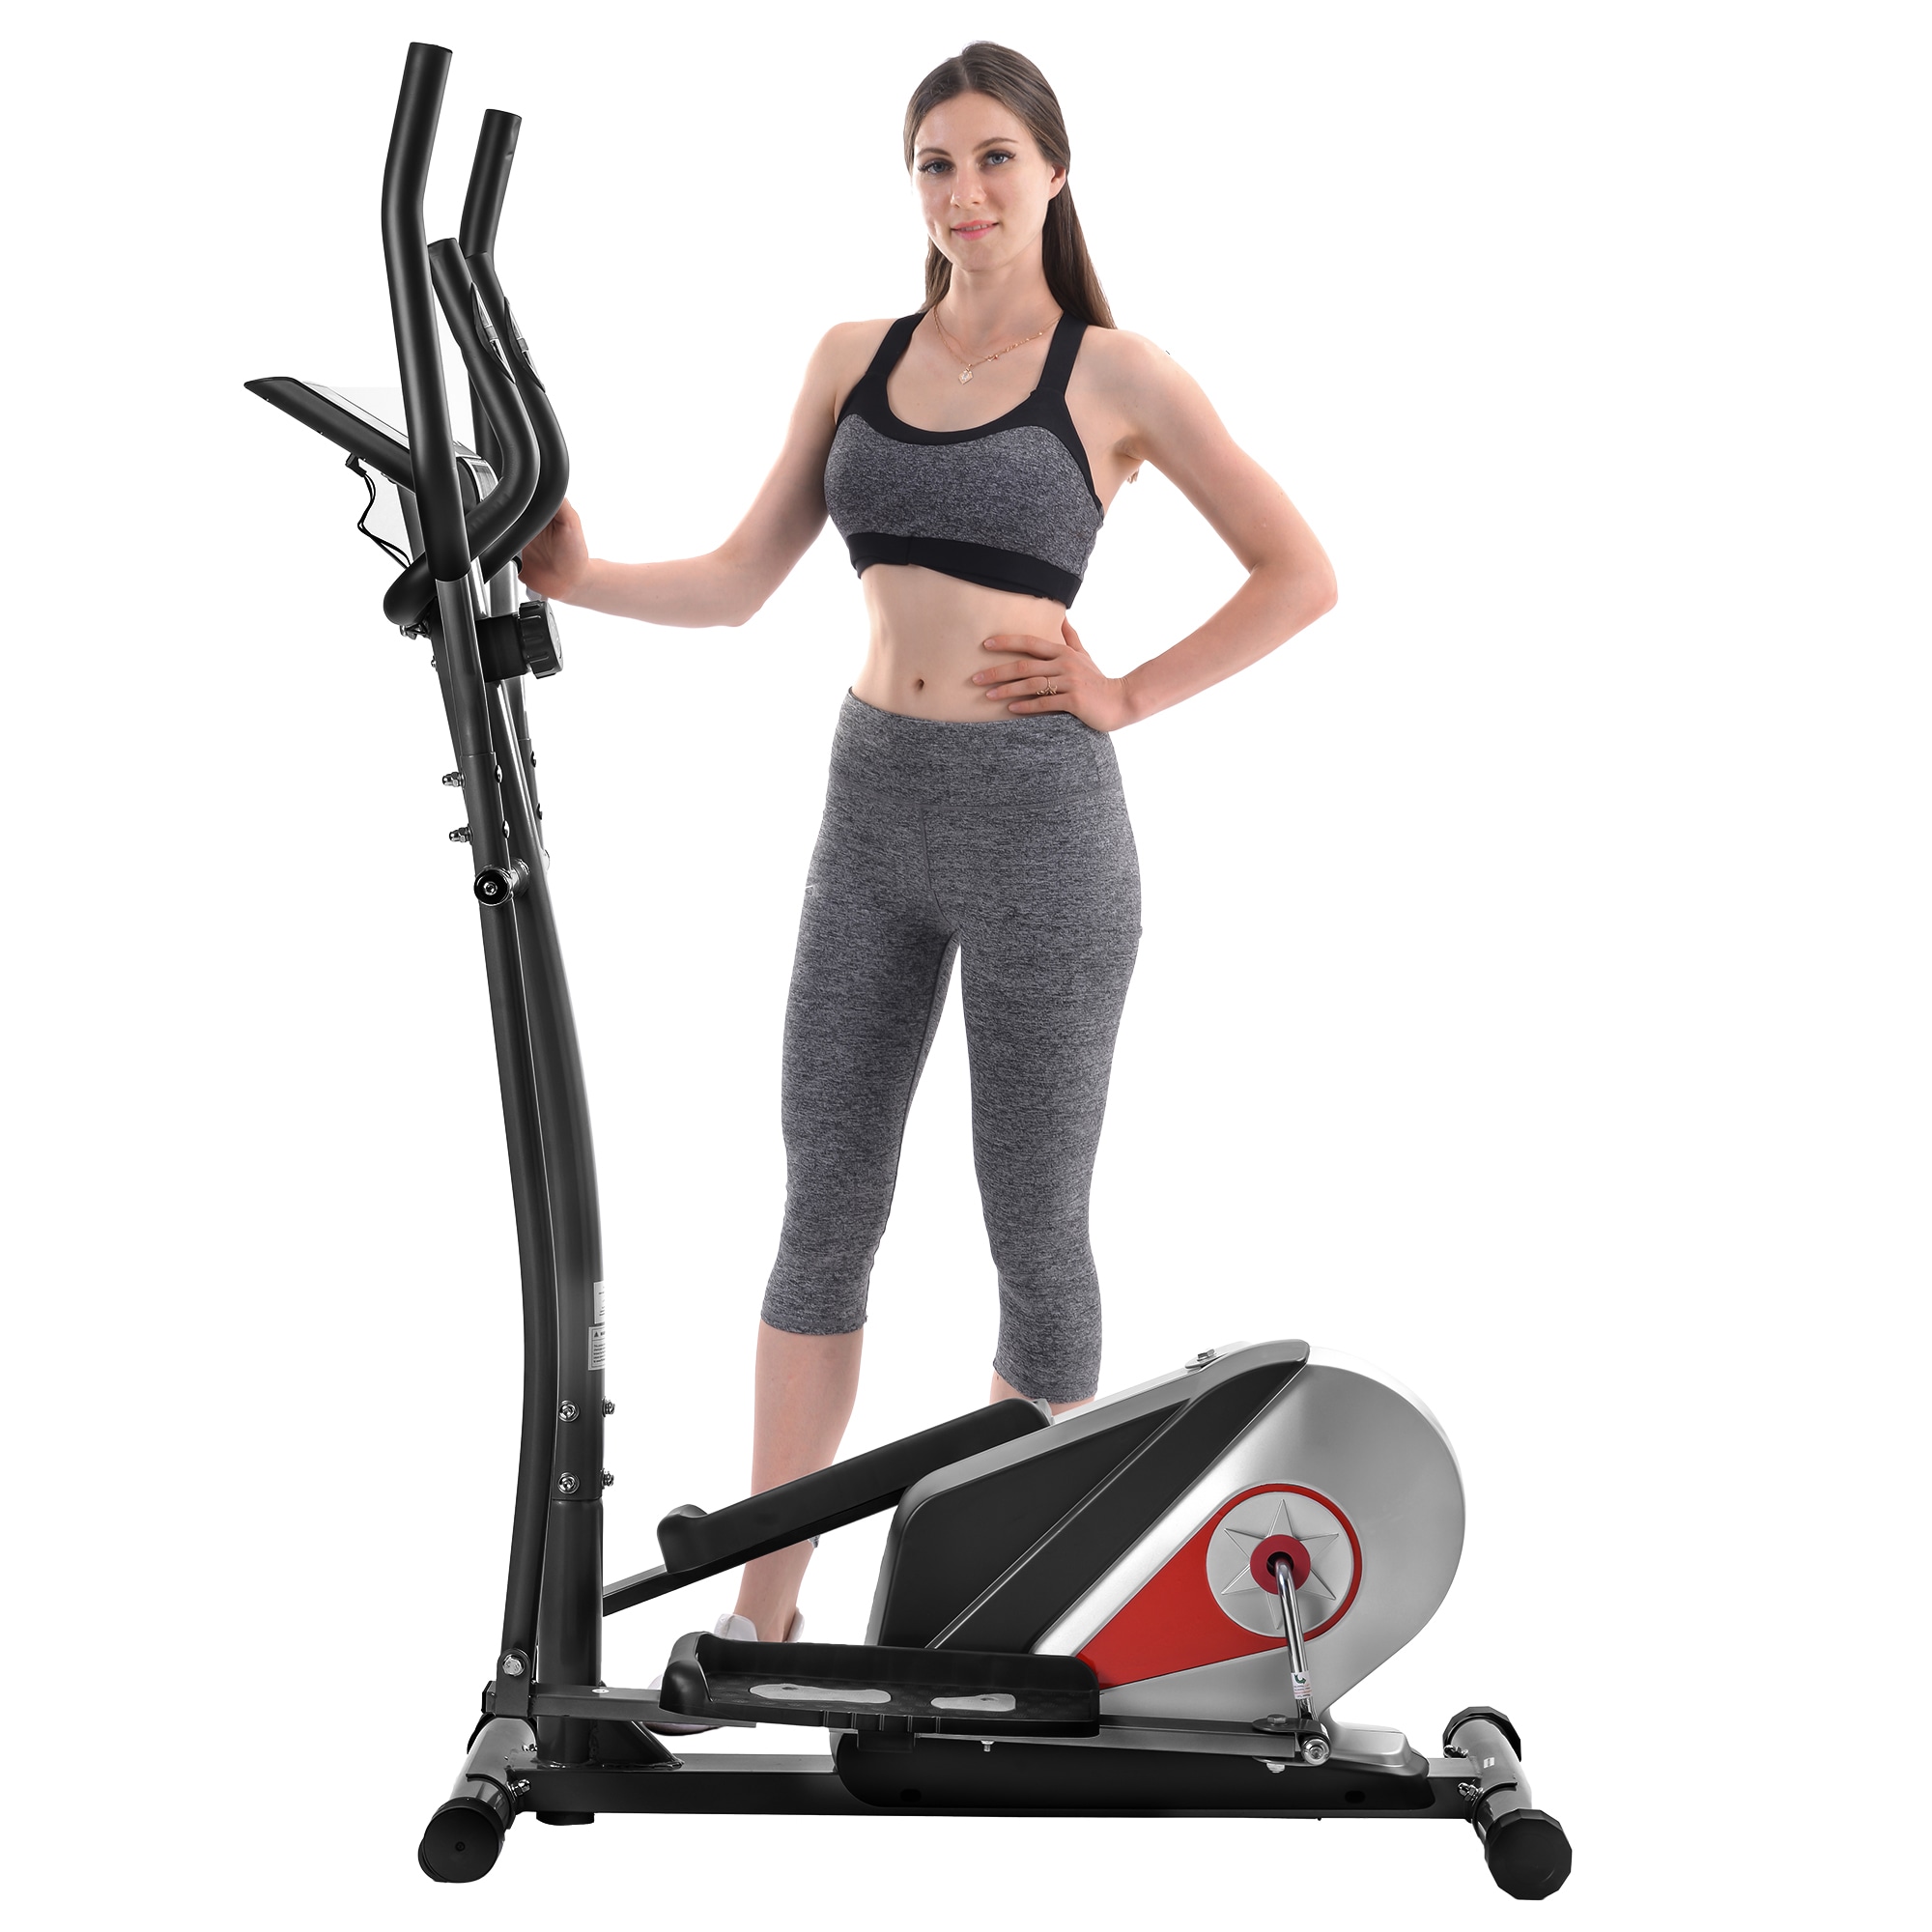 Loyo Elliptical Exercise Machine,Elliptical Training Machines with 3PC Crank Magnetic Elliptical Machine for Home Use with 8 Levels Adjustable Resistance LCD Monitor and Pulse Black 